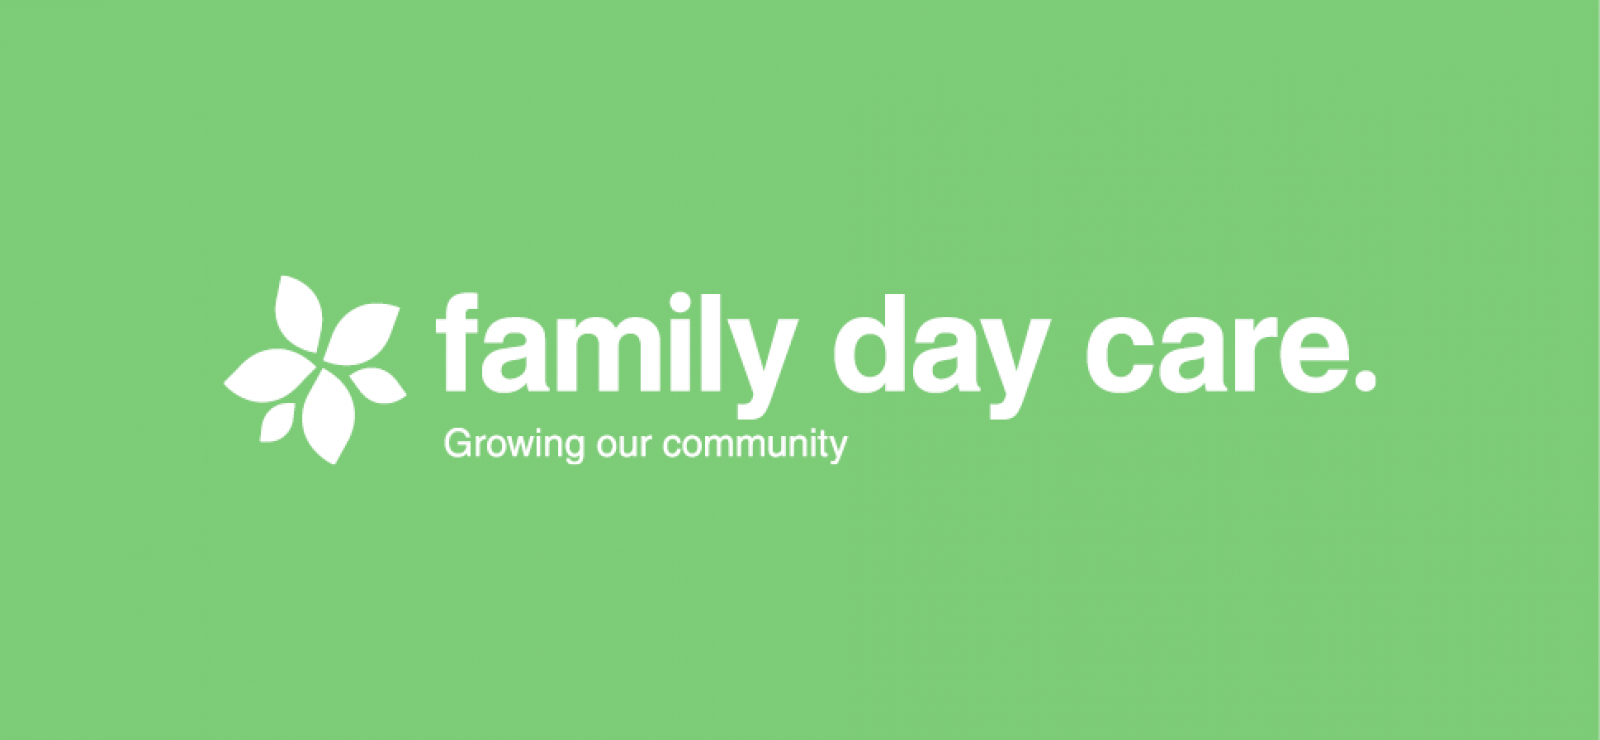 Family day care banner image